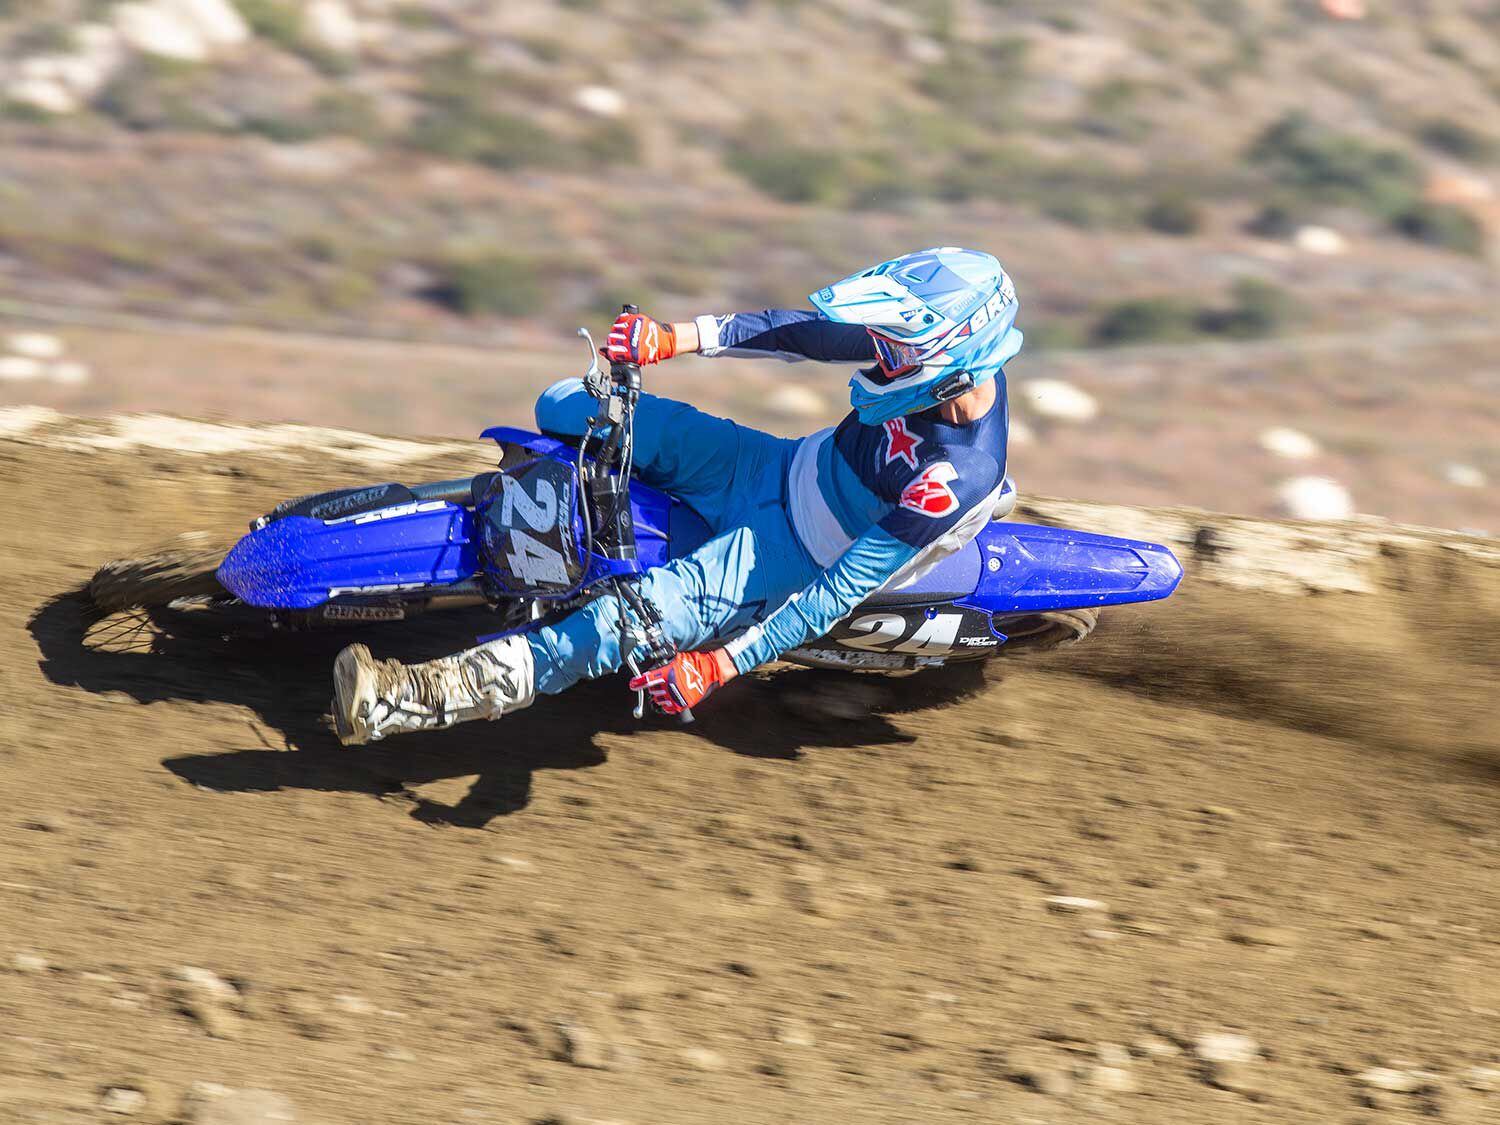 The Yamaha YZ250F wins <em>Dirt Rider</em>’s 2021 250 Four-Stroke Motocross Shootout with its well-rounded package in stock trim.